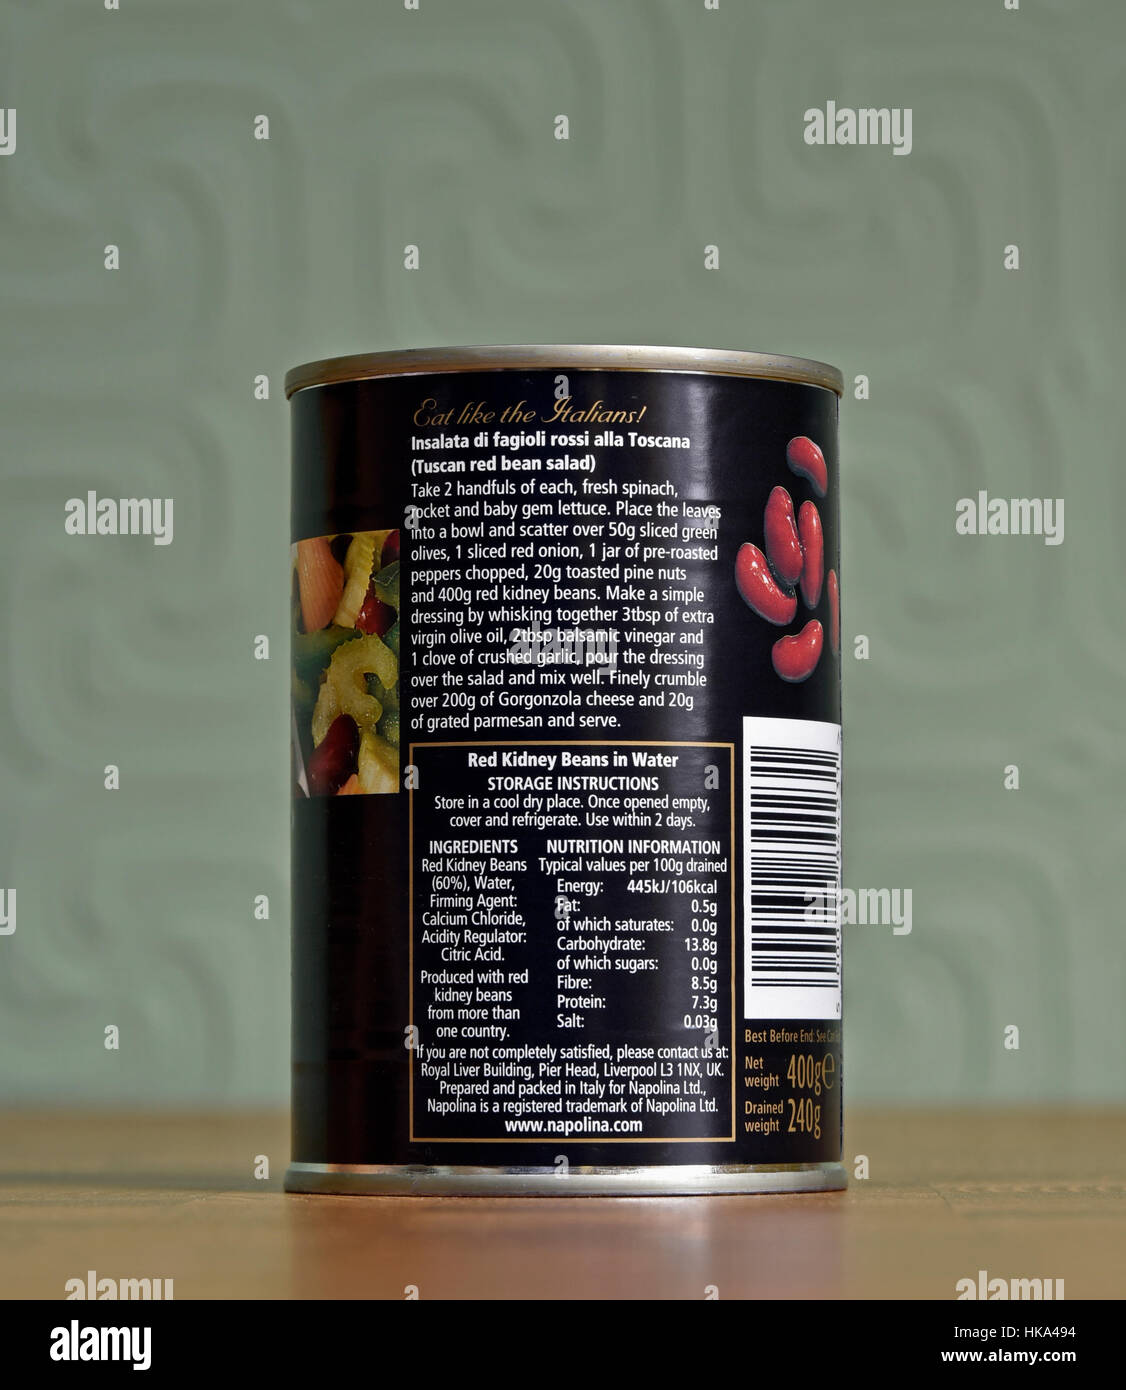 Can of Napolina Red Kidney Beans in Water. Receipt. Nutrition Information and Storage Instructions. Stock Photo